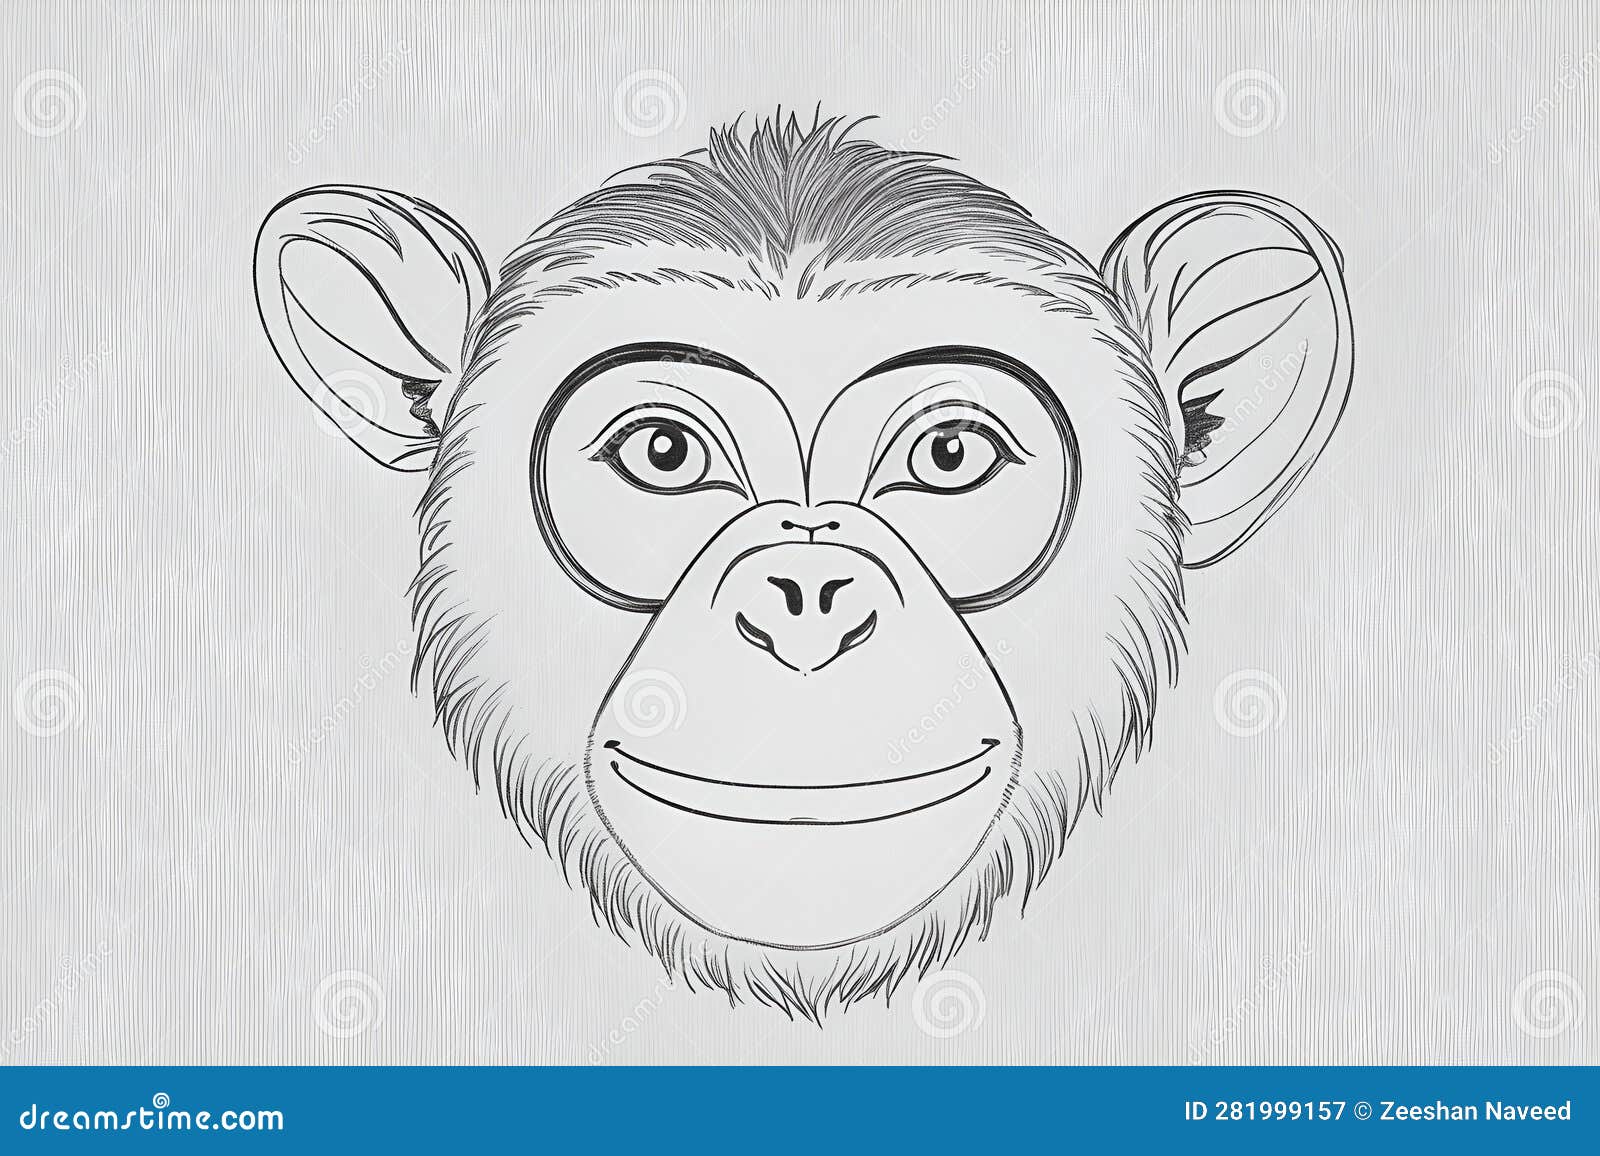 Monkey Drawing  How To Draw A Monkey Step By Step